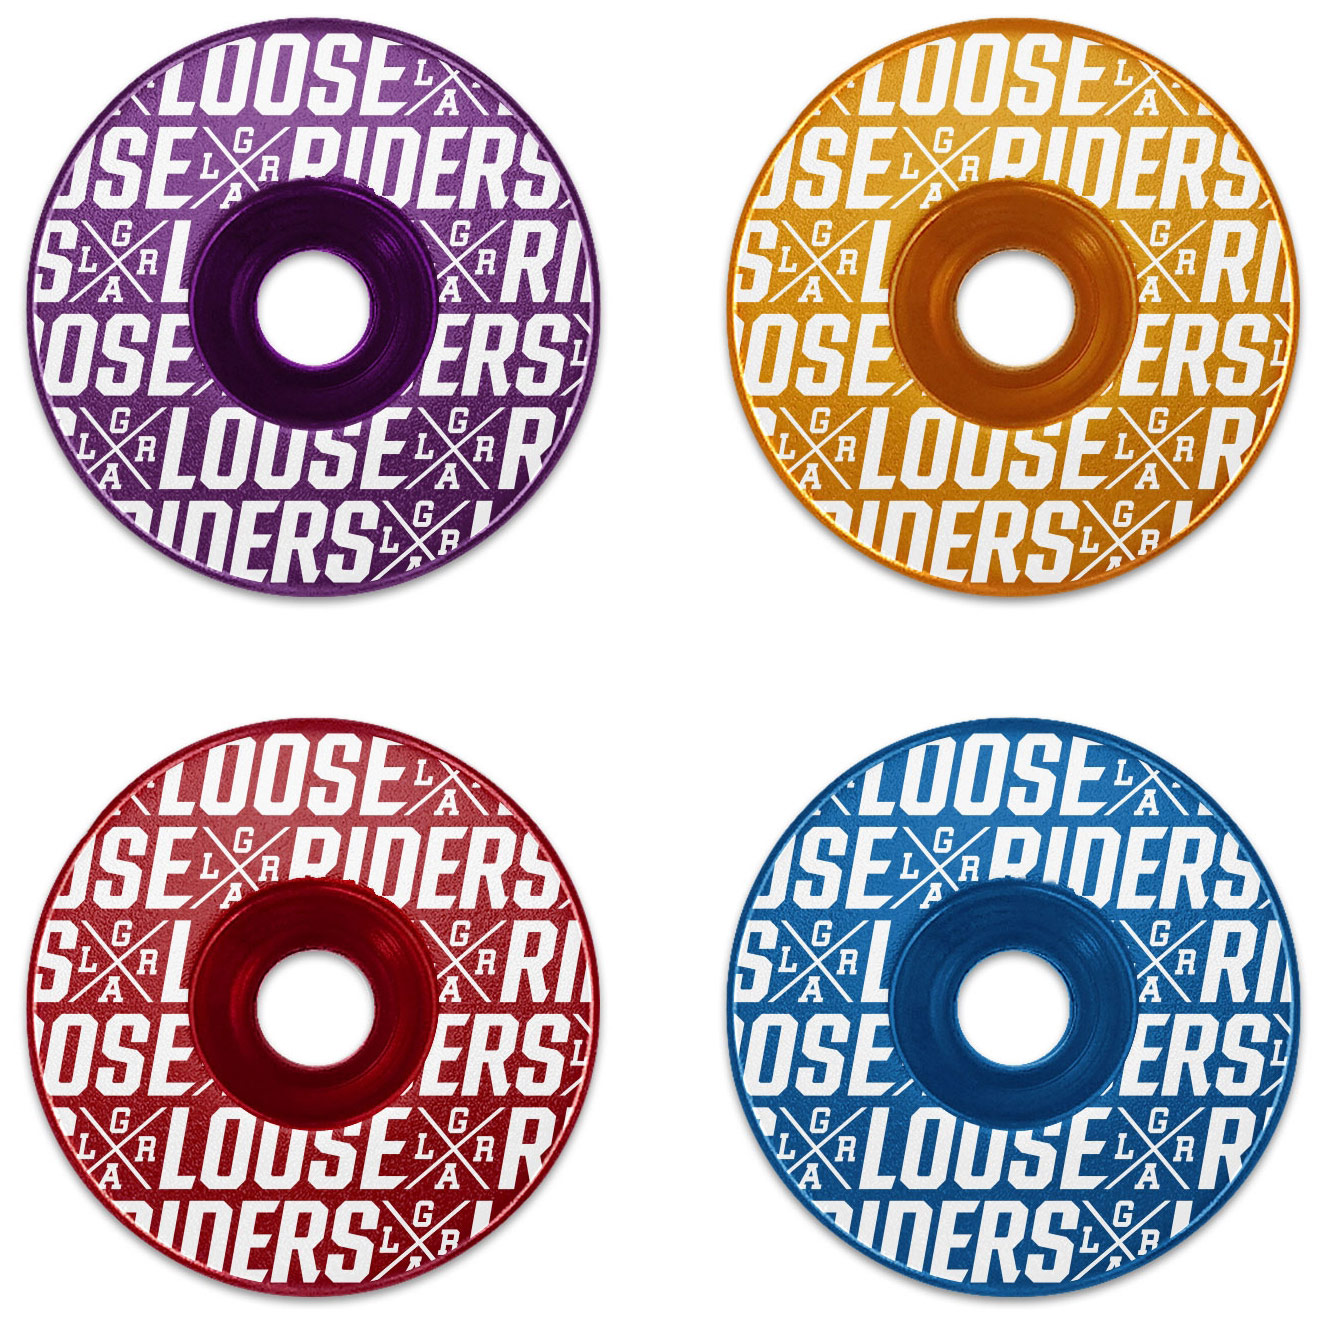 Picture of Loose Riders Logo Pattern Ahead Cap